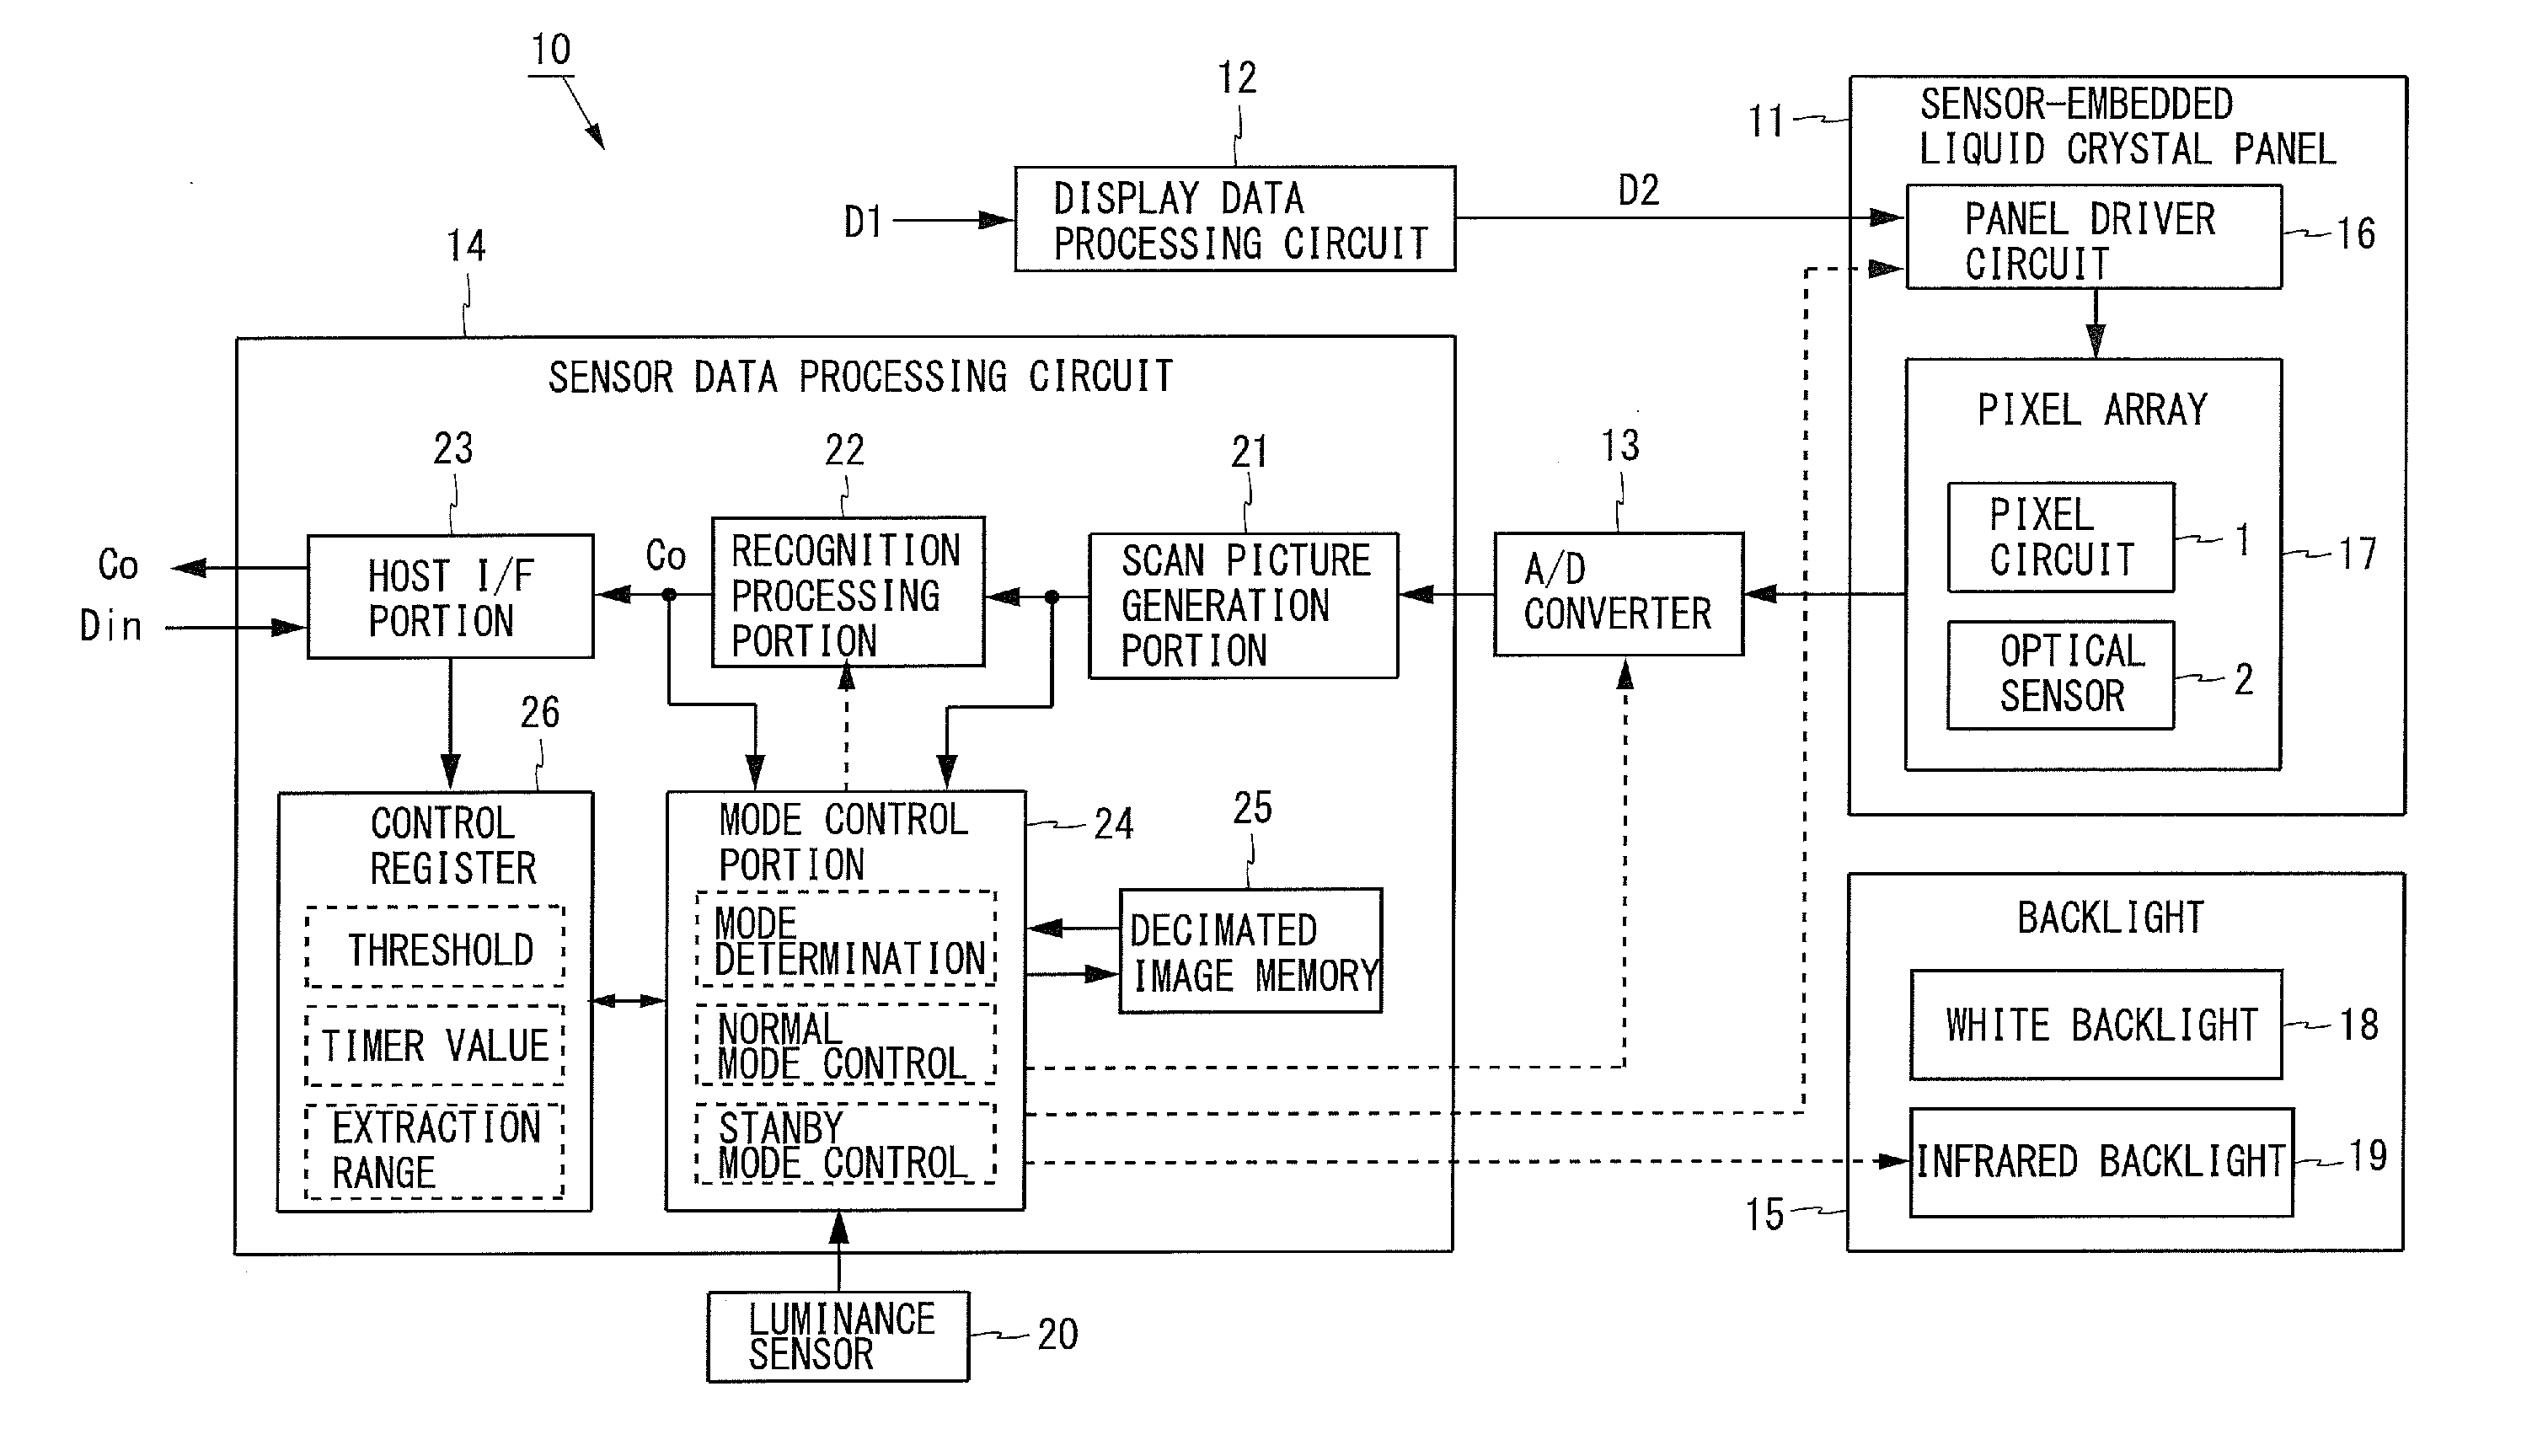 Display device with optical sensors